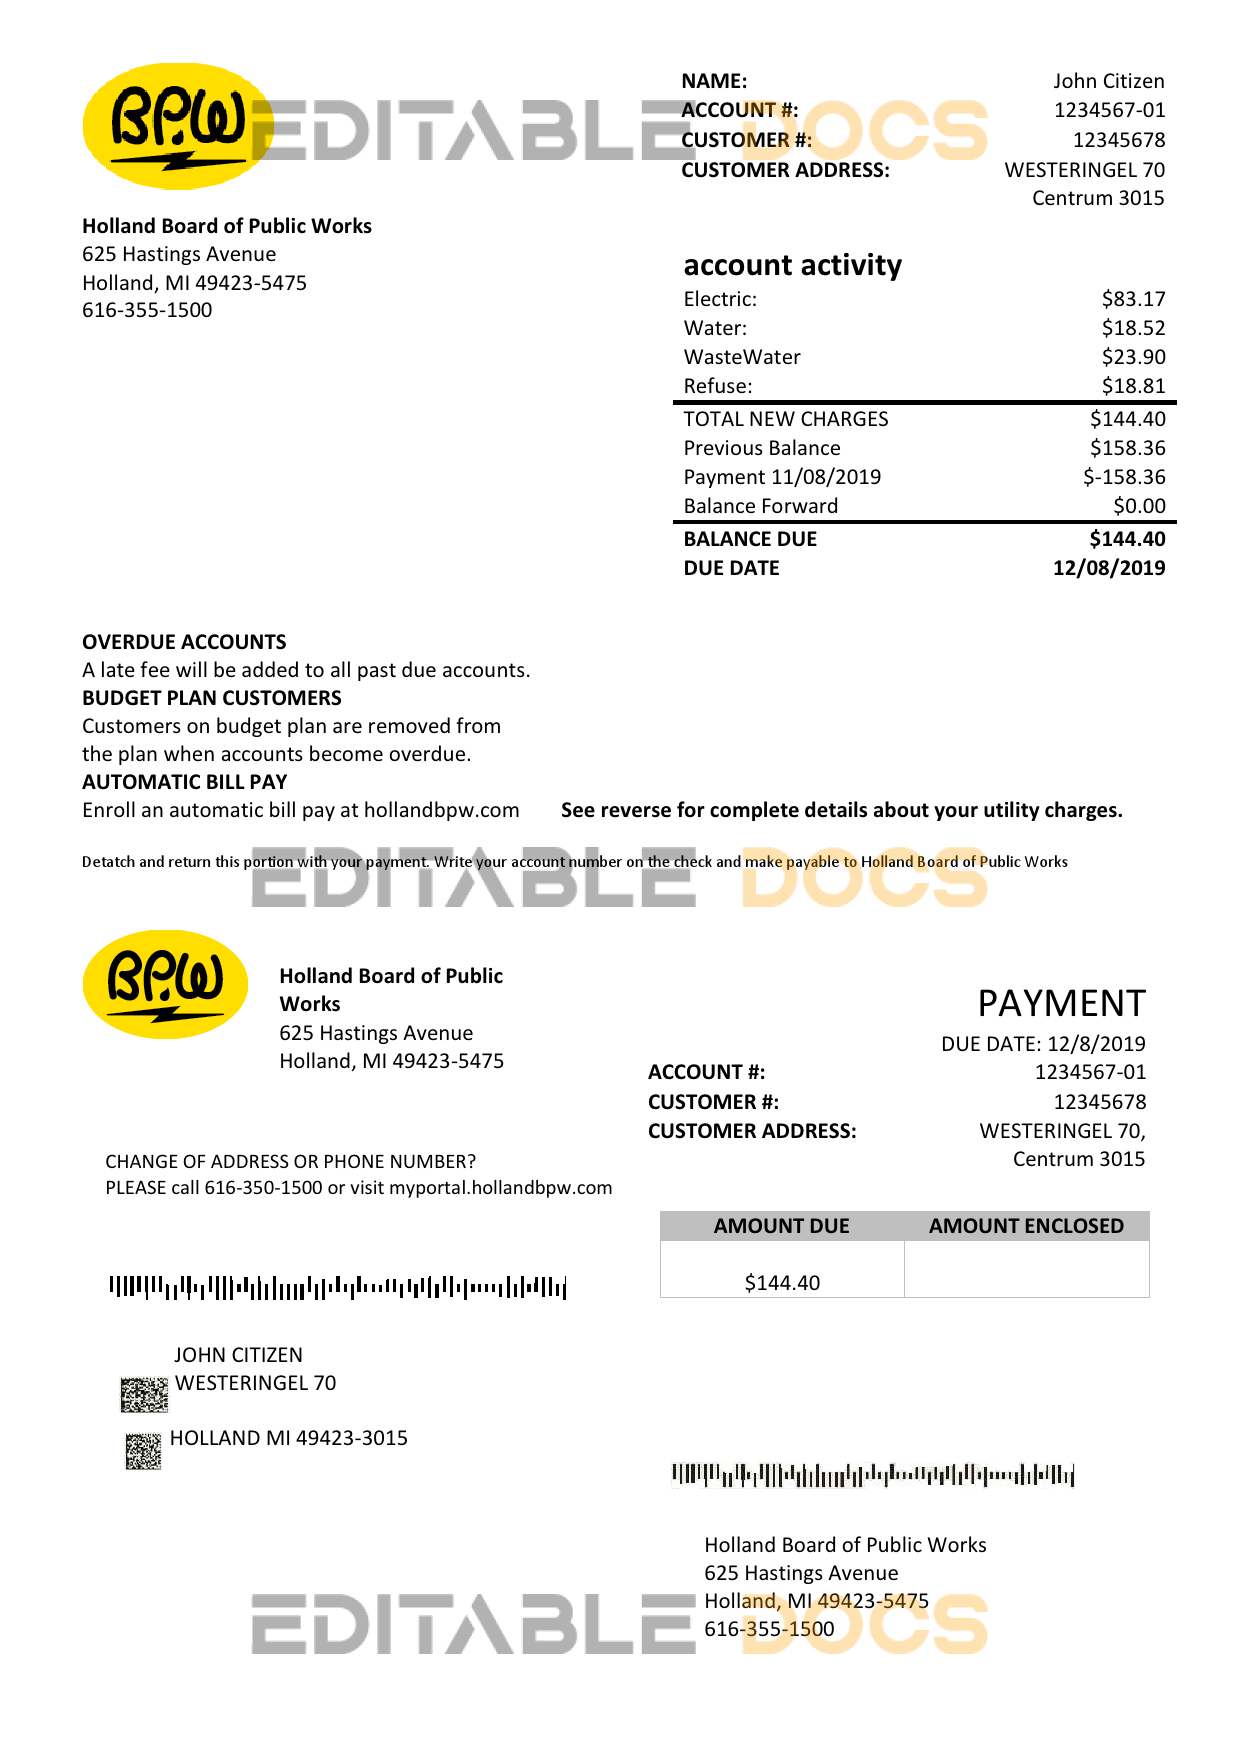 Netherlands BPW utility bill template in Word and PDF format